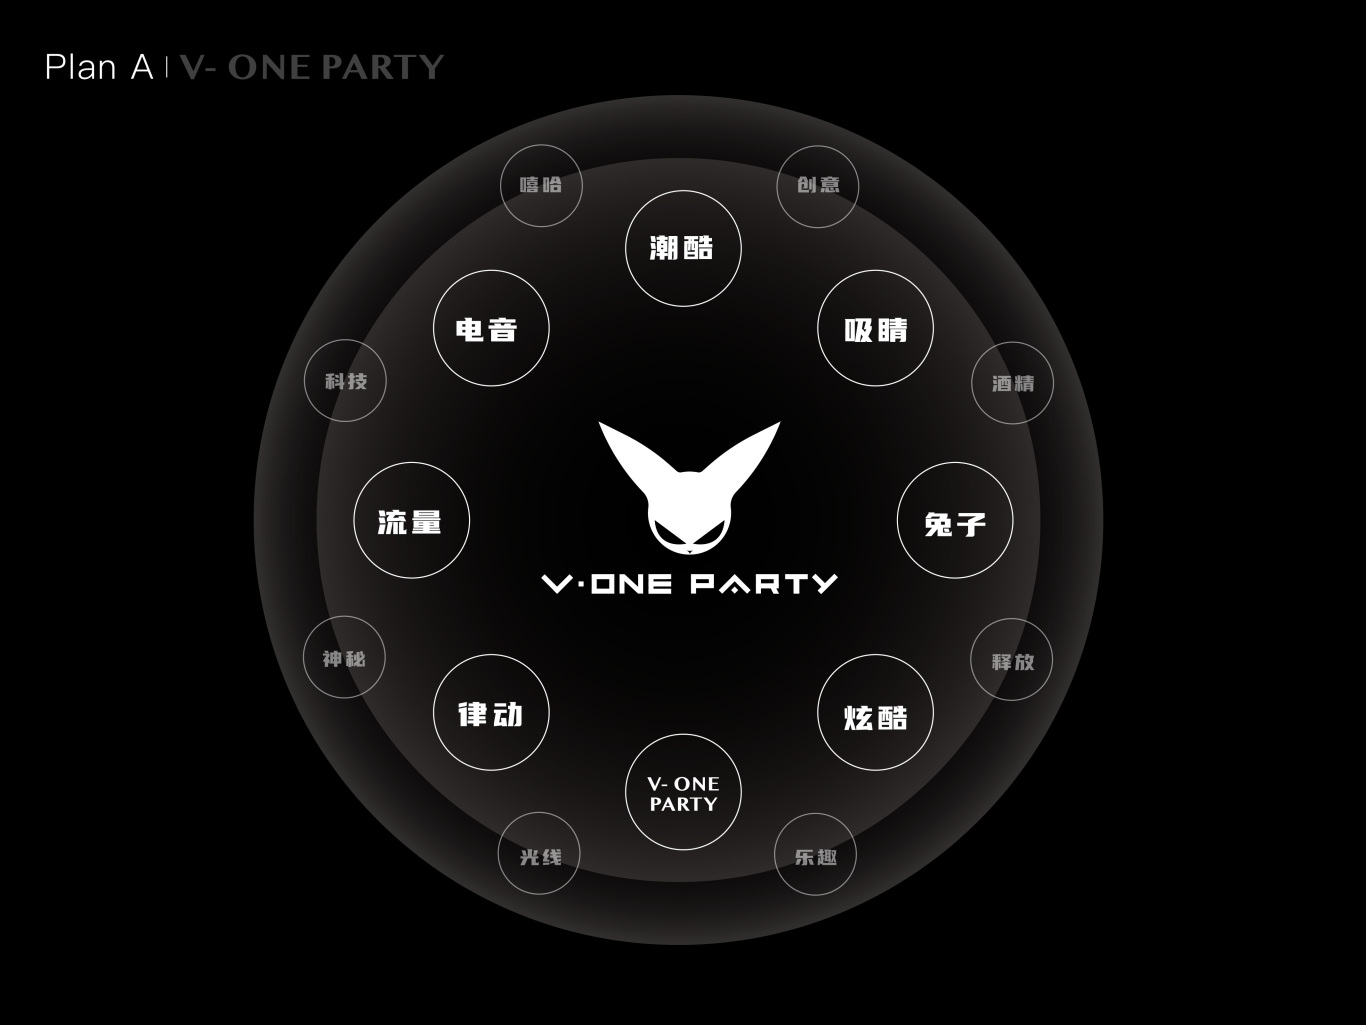 V-ONE PARTY夜店品牌图0